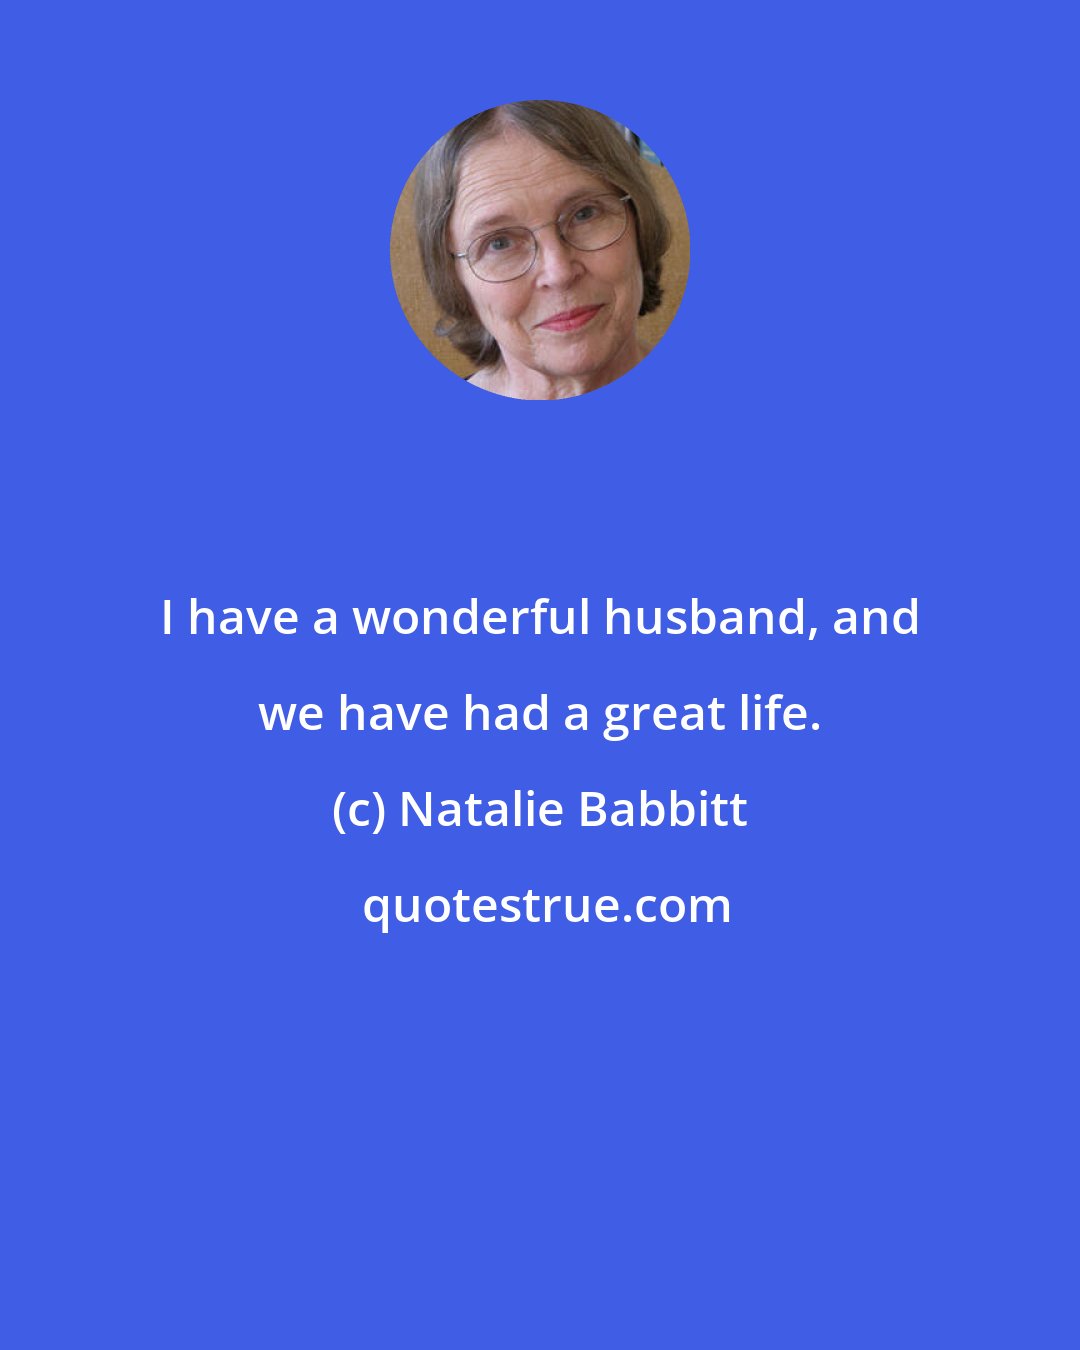 Natalie Babbitt: I have a wonderful husband, and we have had a great life.